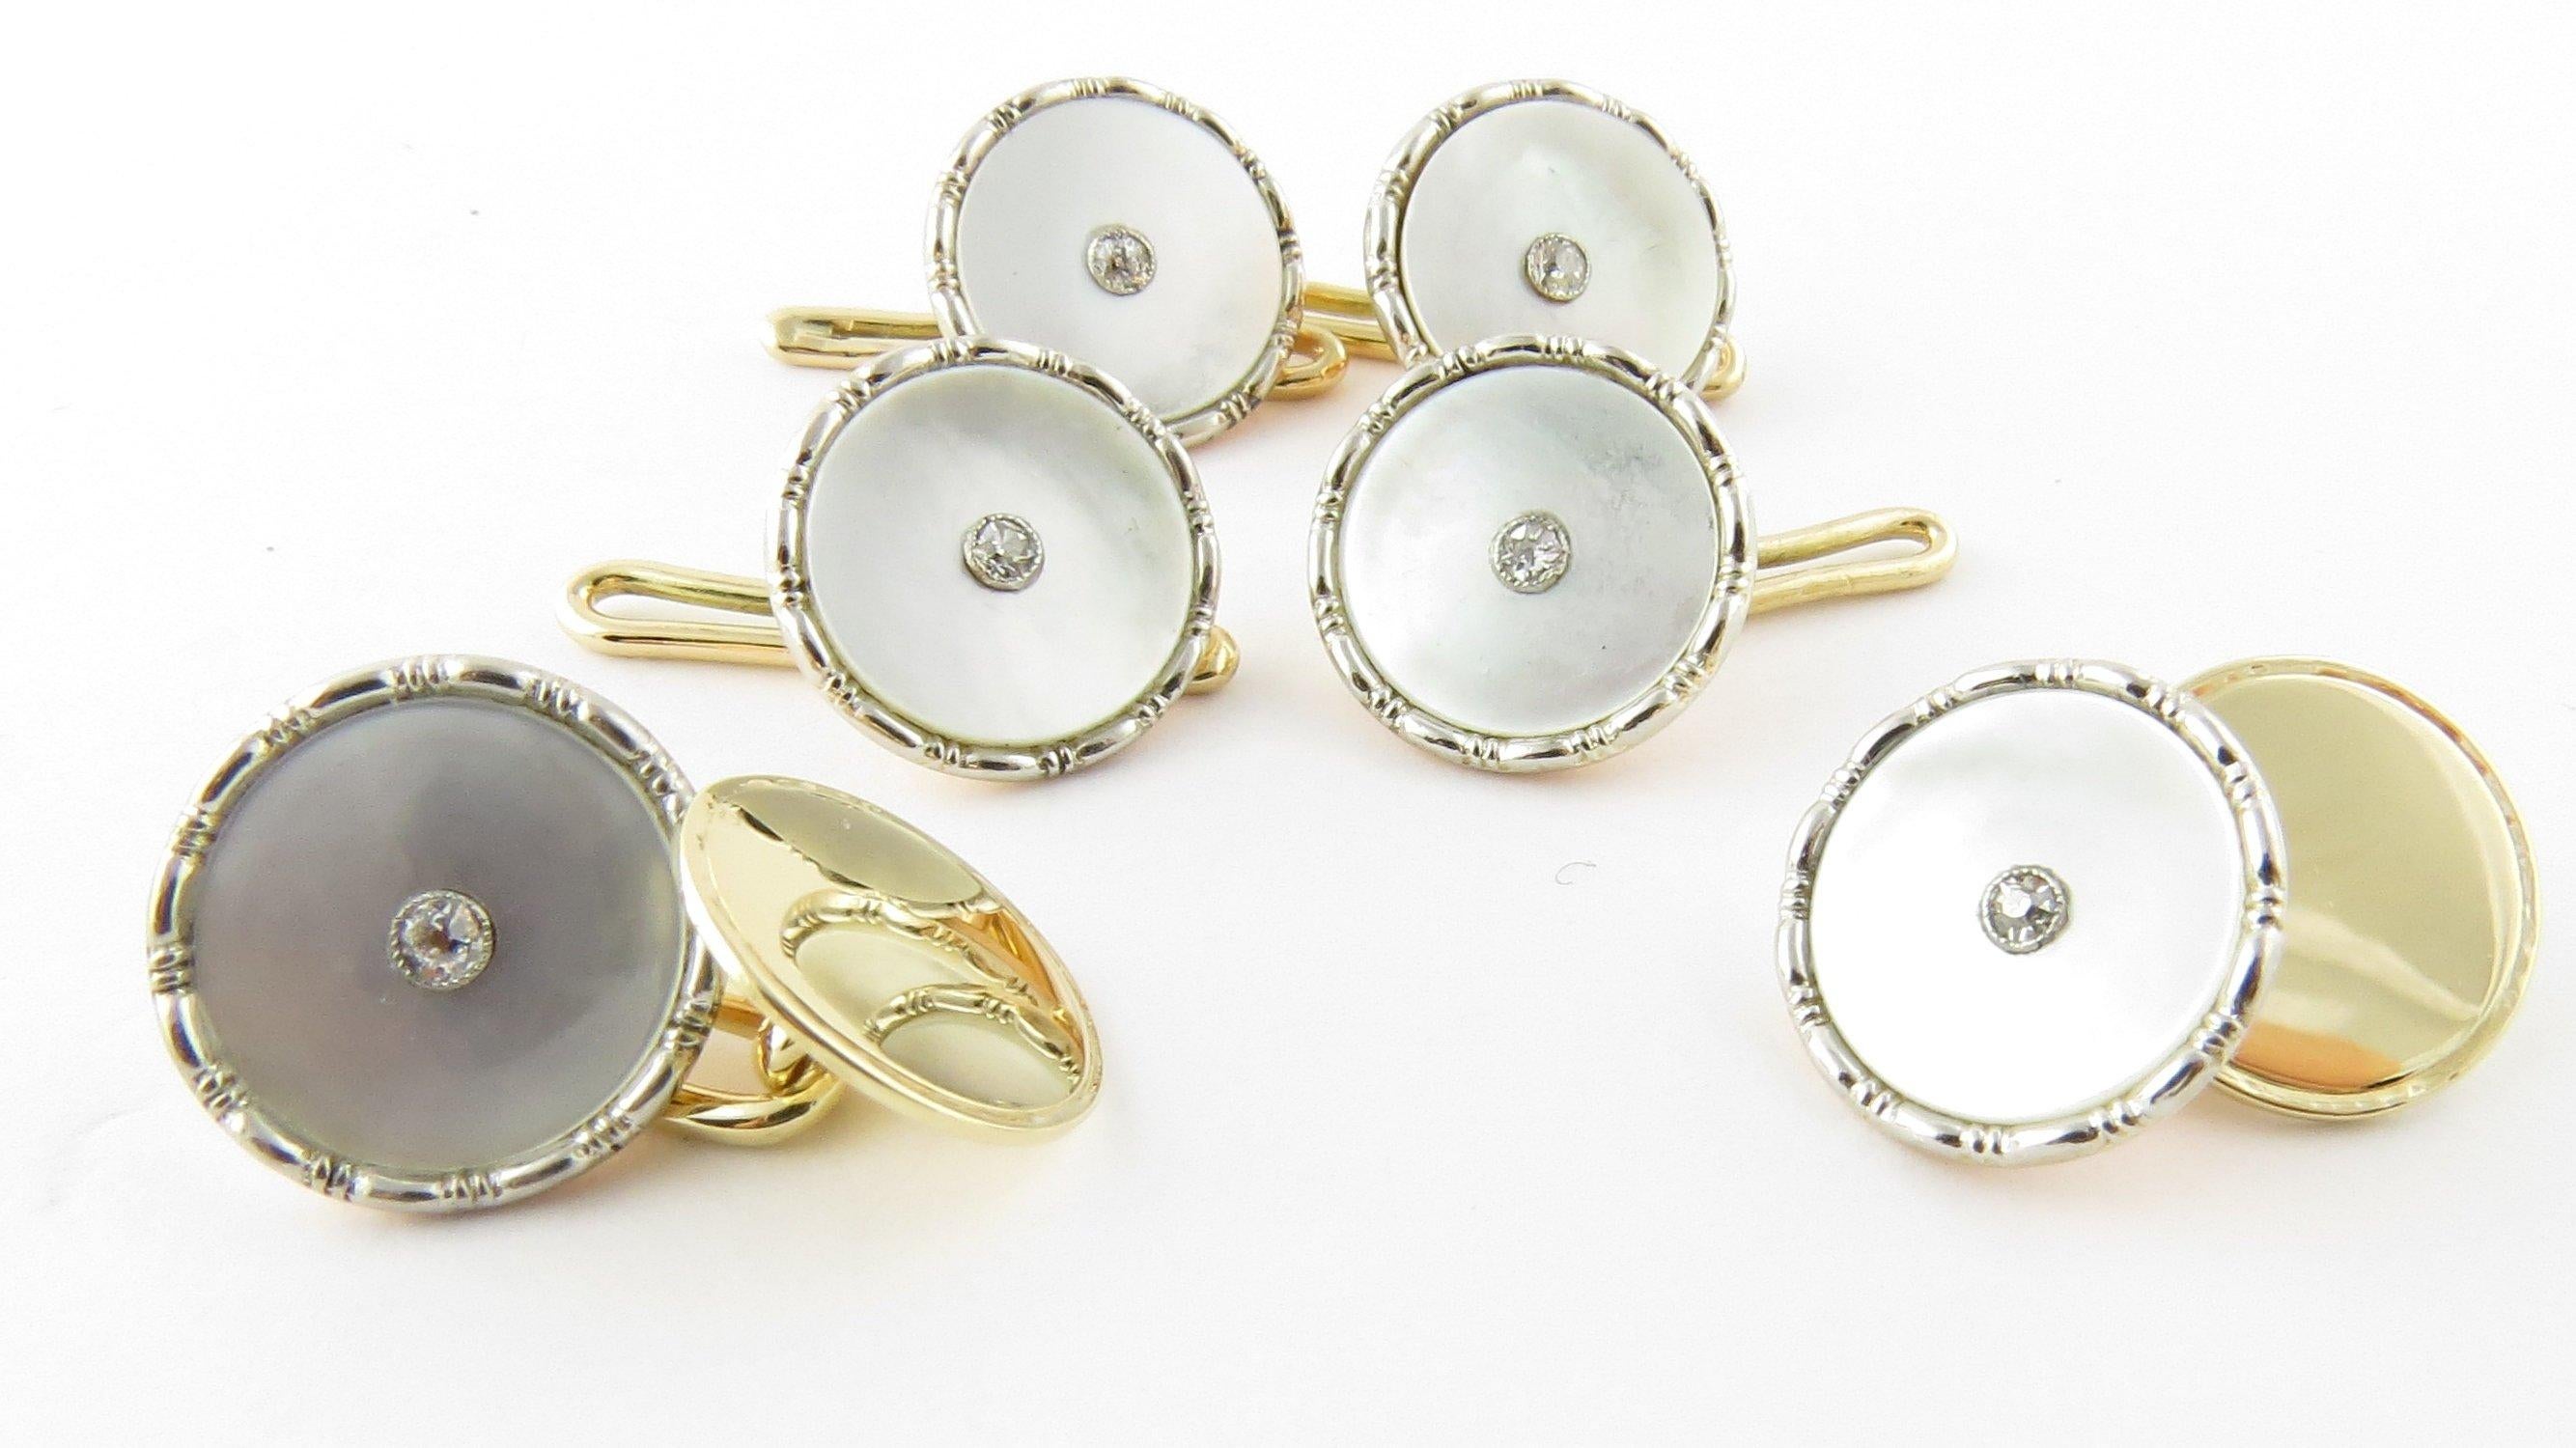 Vintage 9 Karat Yellow Gold Mother-of-Pearl and Diamond Tuxedo Buttons and Cufflinks. This elegant set includes one pair of cufflinks and four tuxedo buttons, each detailed with stunning mother-of-pearl and one European cut diamond set in